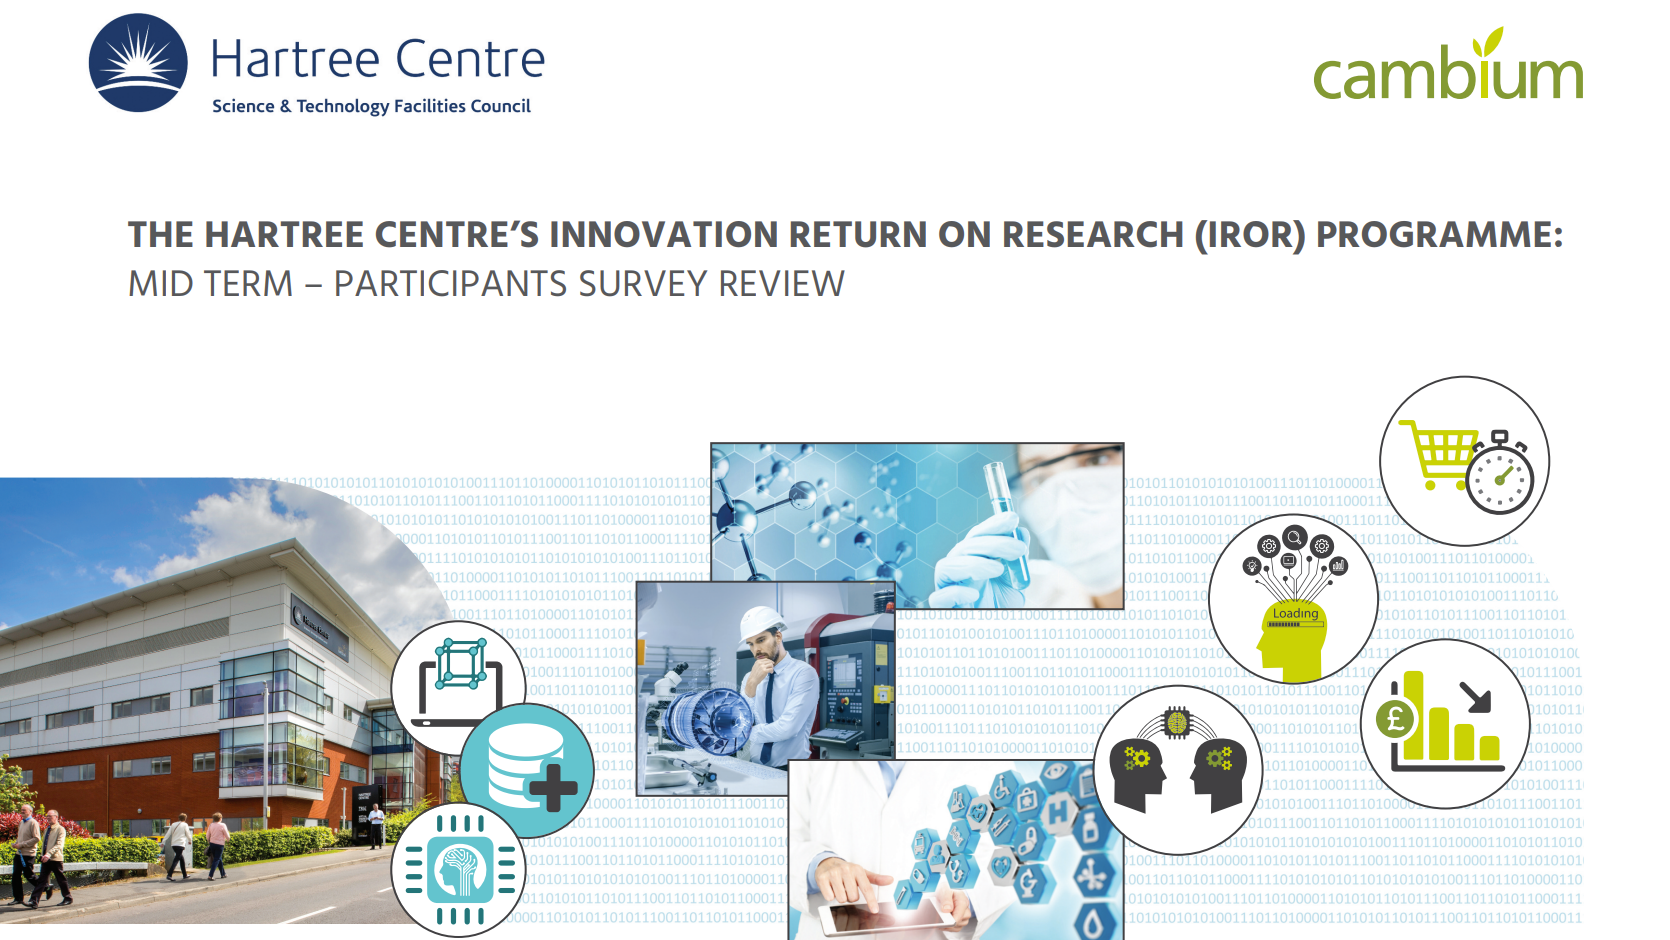 Hartree Centre Innovation Return on Research (IROR) Programme Mid-Term Participants Survey Review